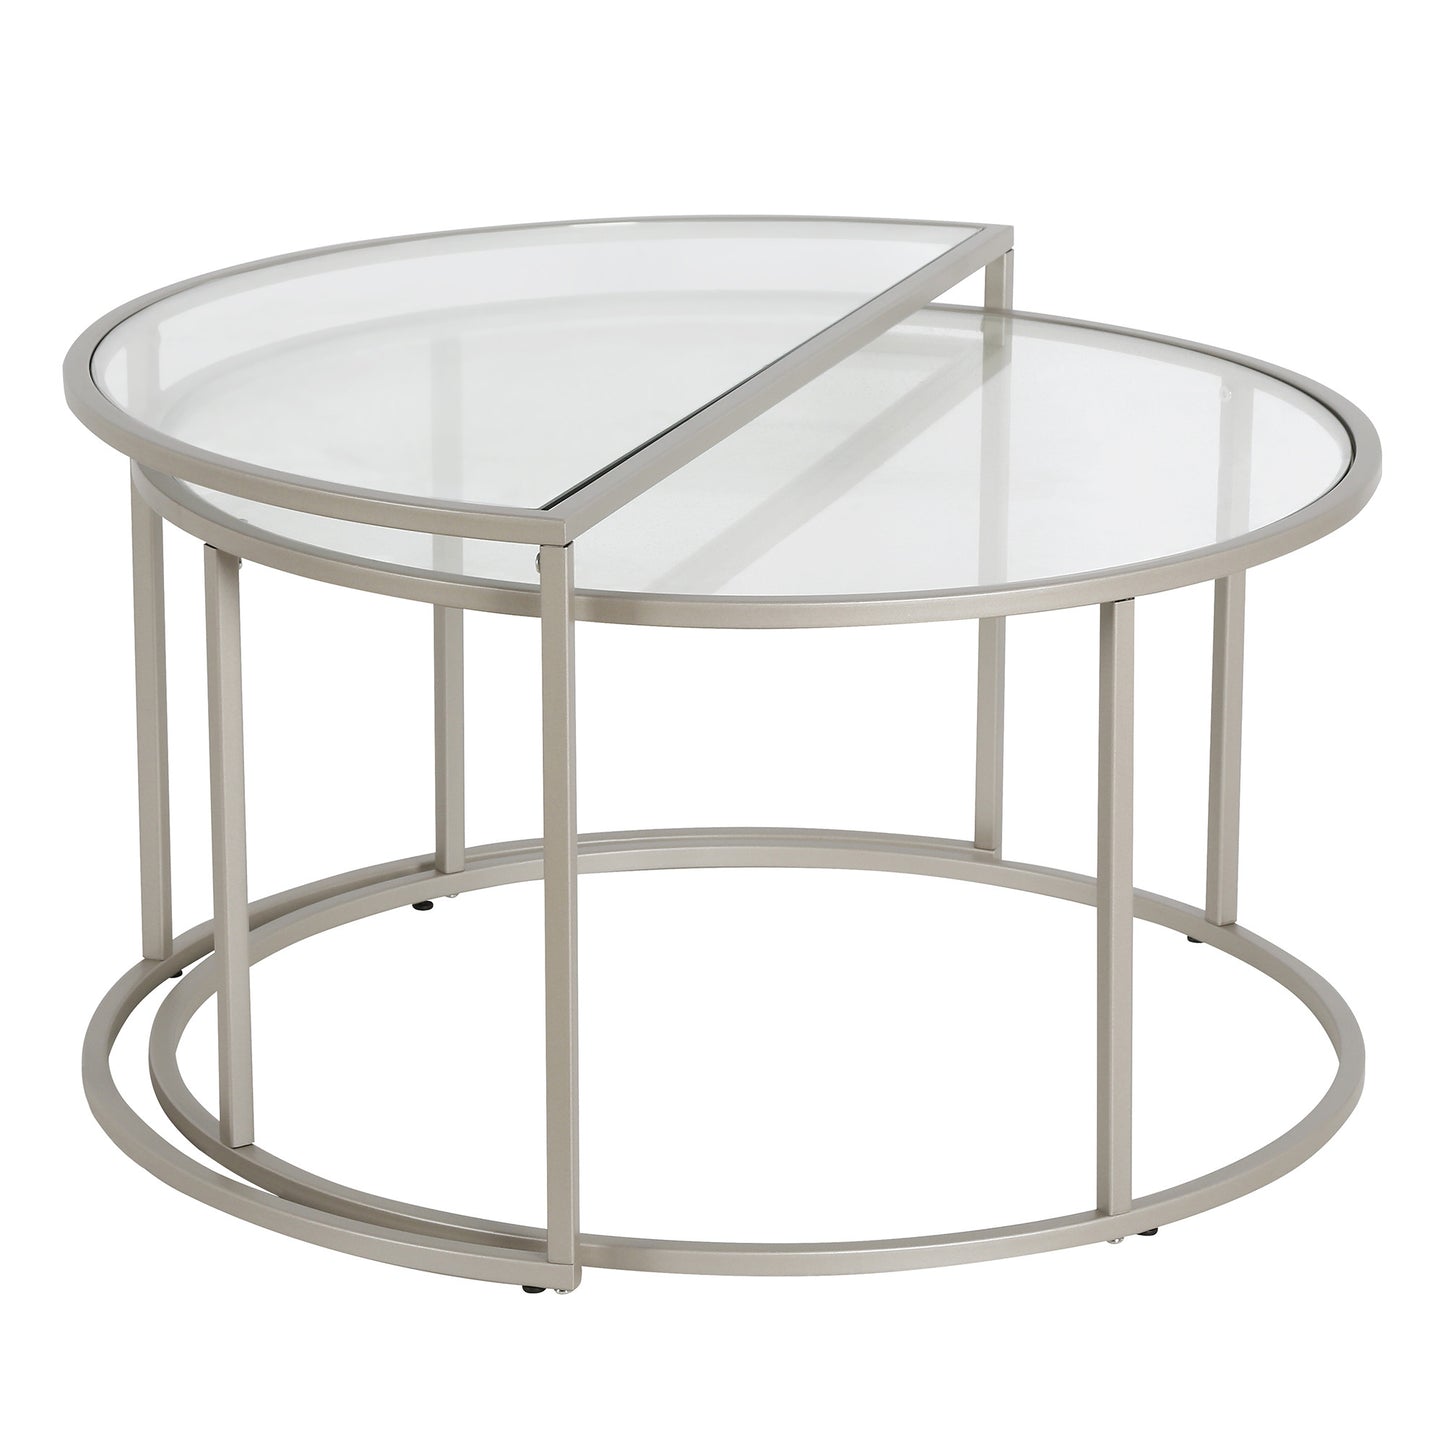 Set of Two 33" Silver Glass And Steel Half Circle Nested Coffee Tables